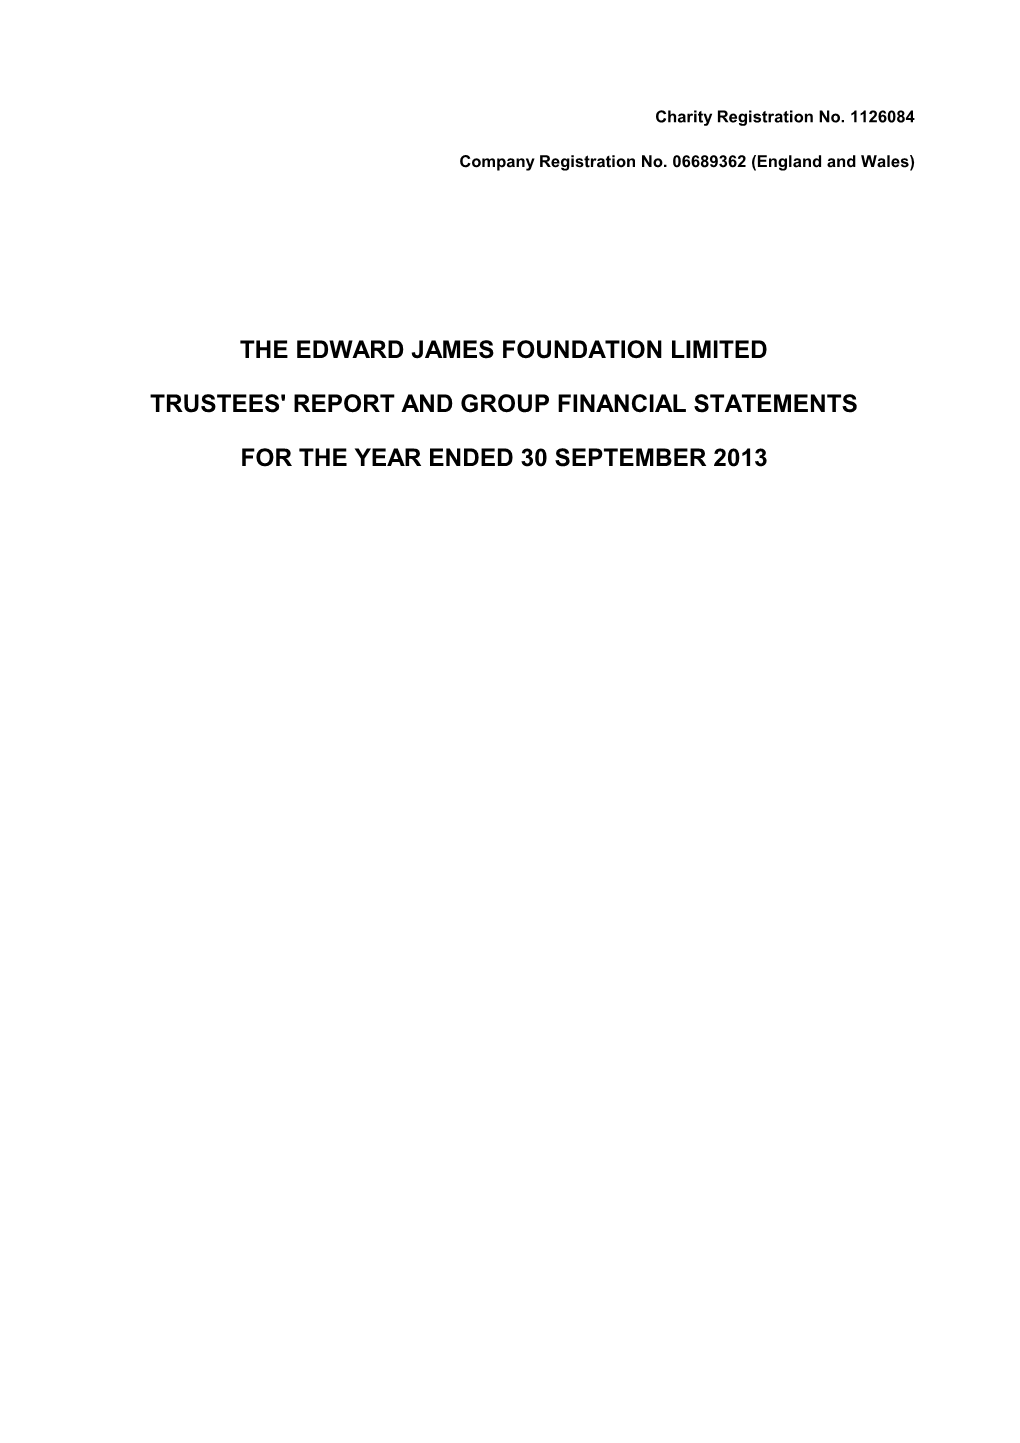 The Edward James Foundation Limited Trustees' Report